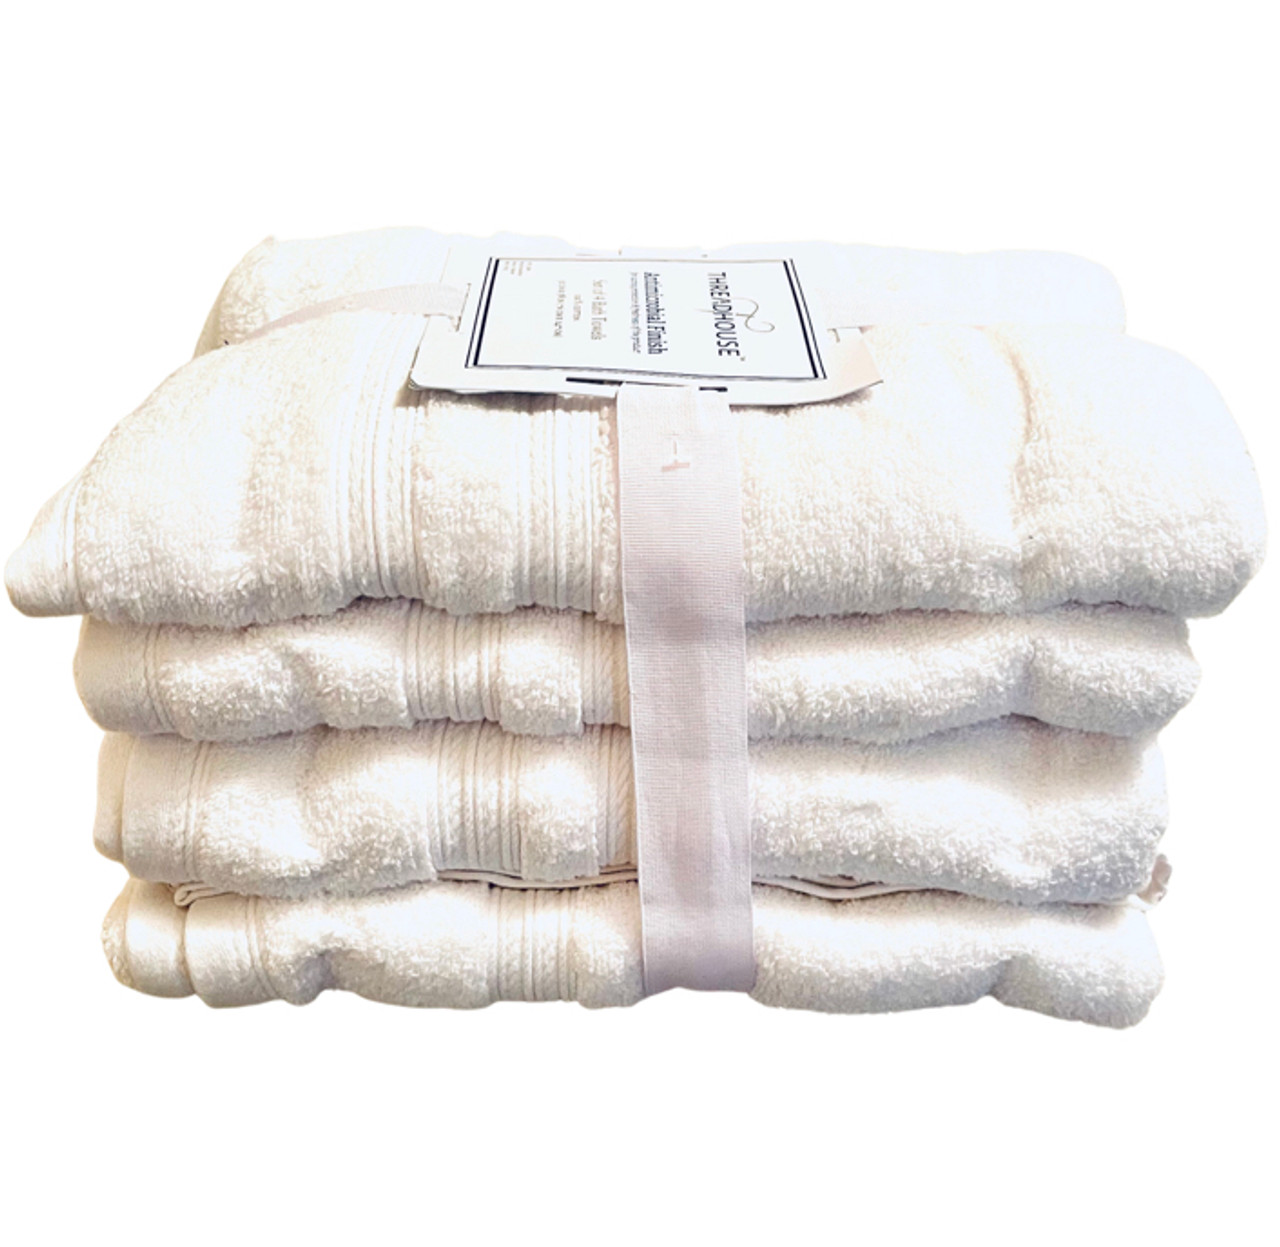 Threadhouse Antimicrobial Finish Set of 4 Bath Towels (Variety of Colors)